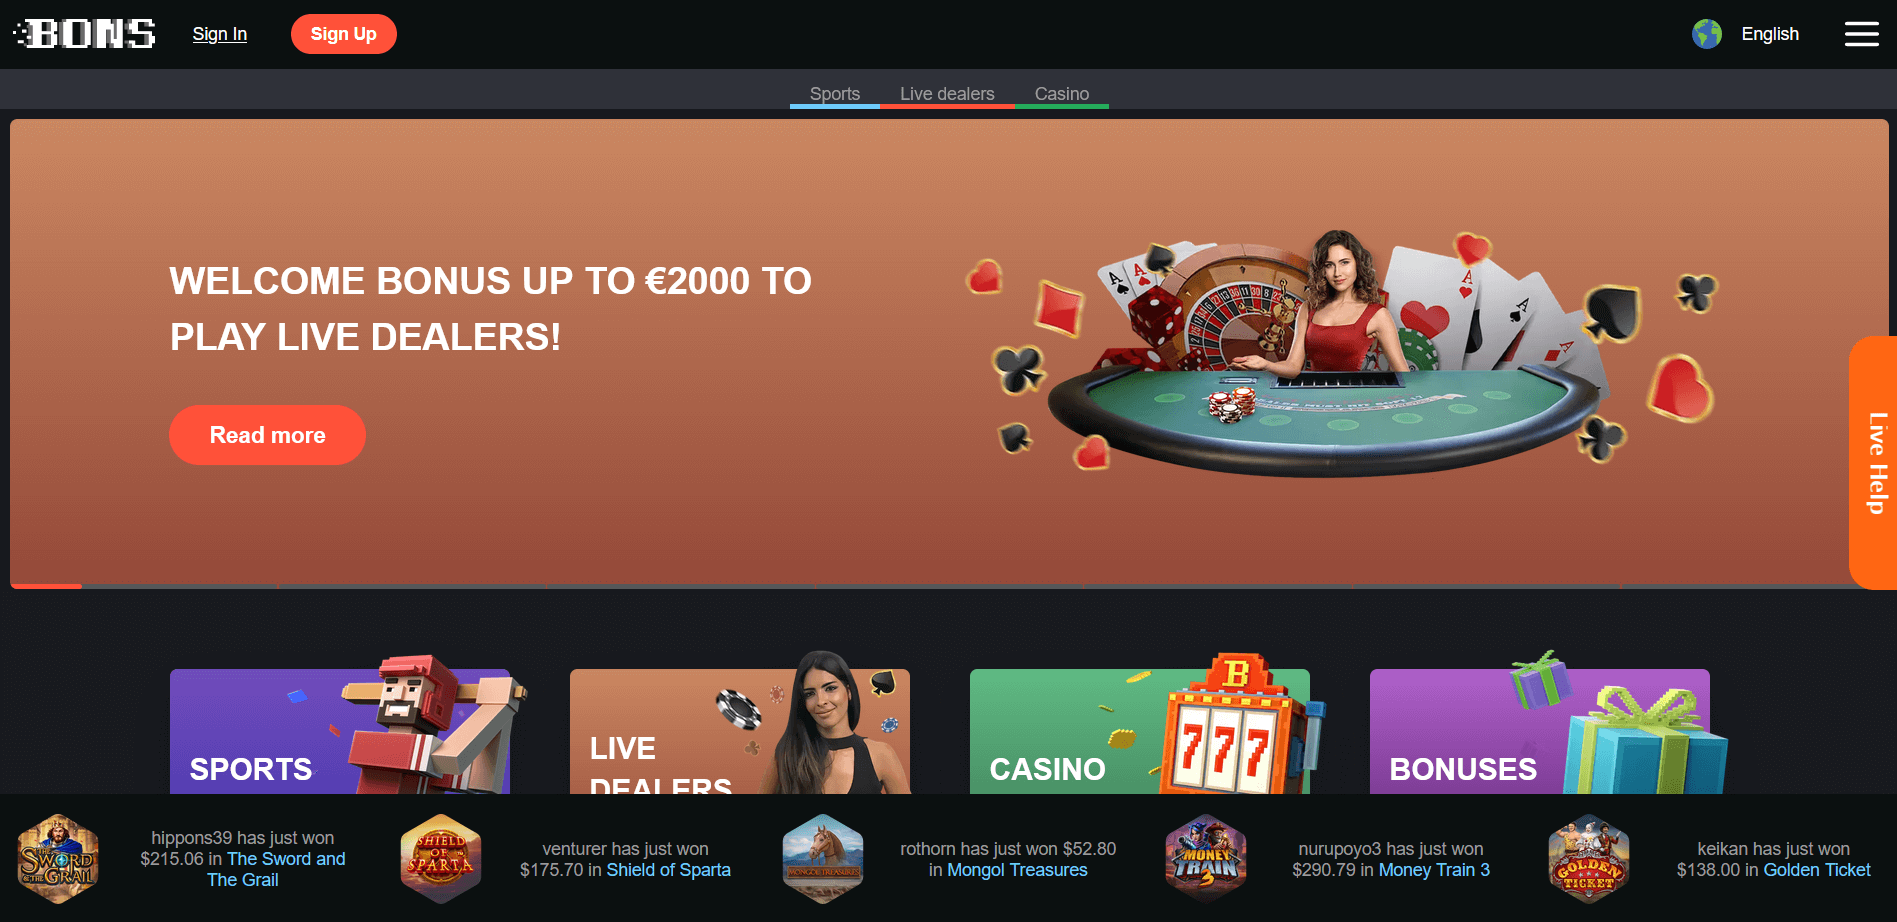 Bons casino website homepage with welcome bonus offer